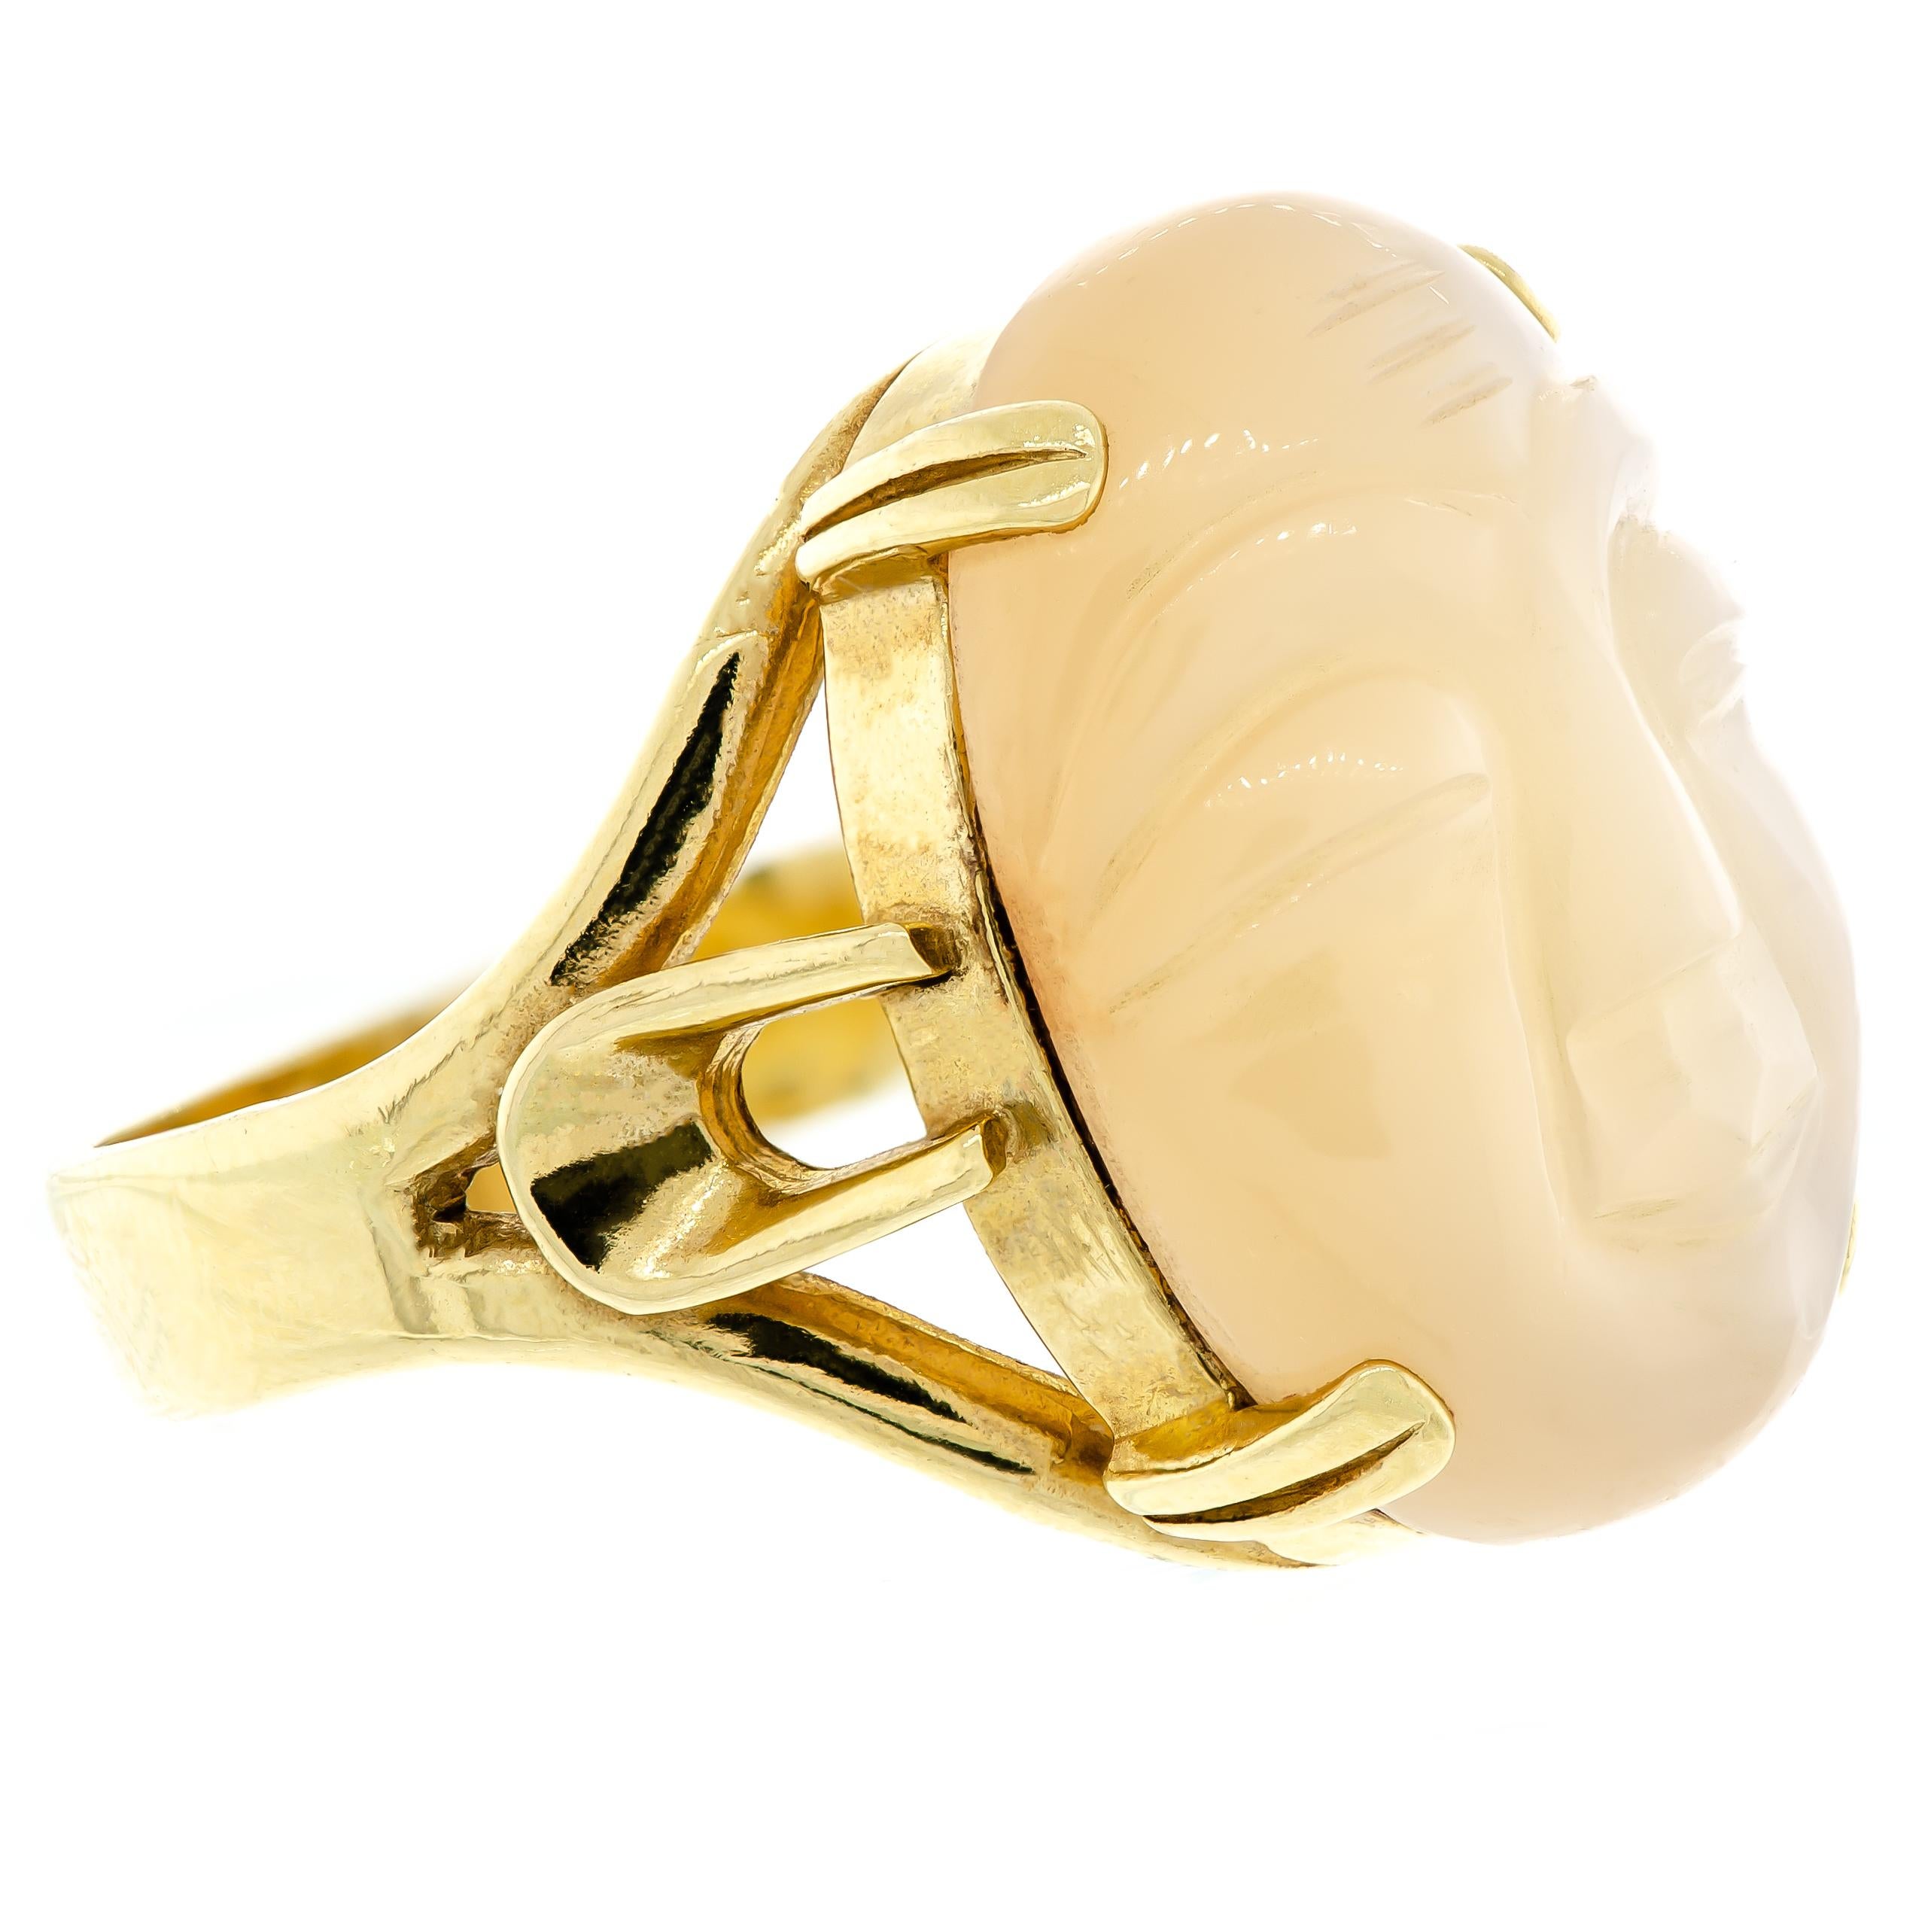 This fun 14kt yellow gold and carved moonstone contemporary ladies' ring is a beautiful addition to a collection. The craved moonstone features a face motif reminding someone of the man on the moon. 

Ring Size: 6.5 
Approximate Width: 0.5